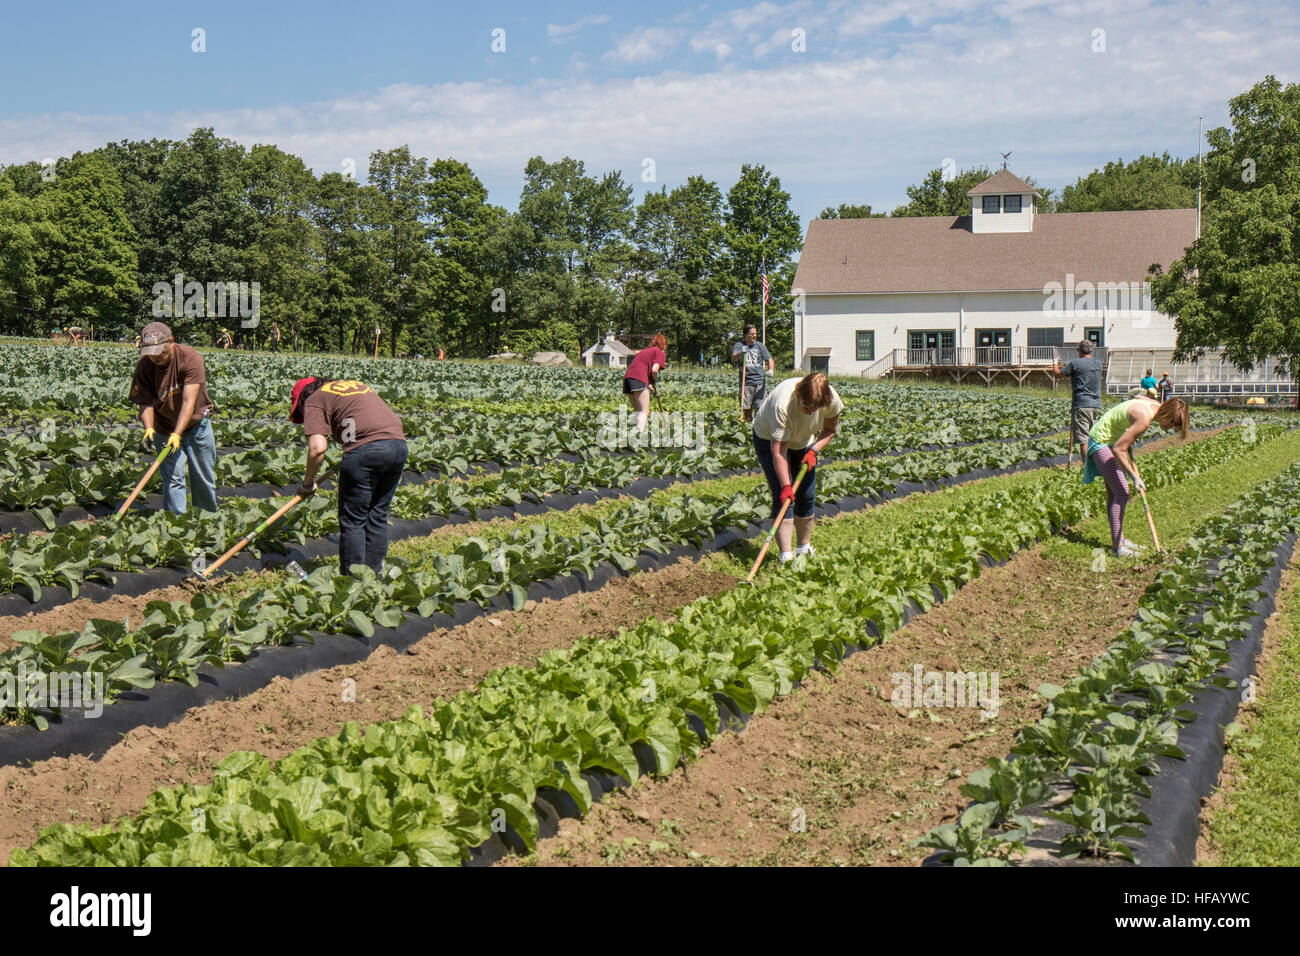 People working on a vegetable farm. Stock Photo